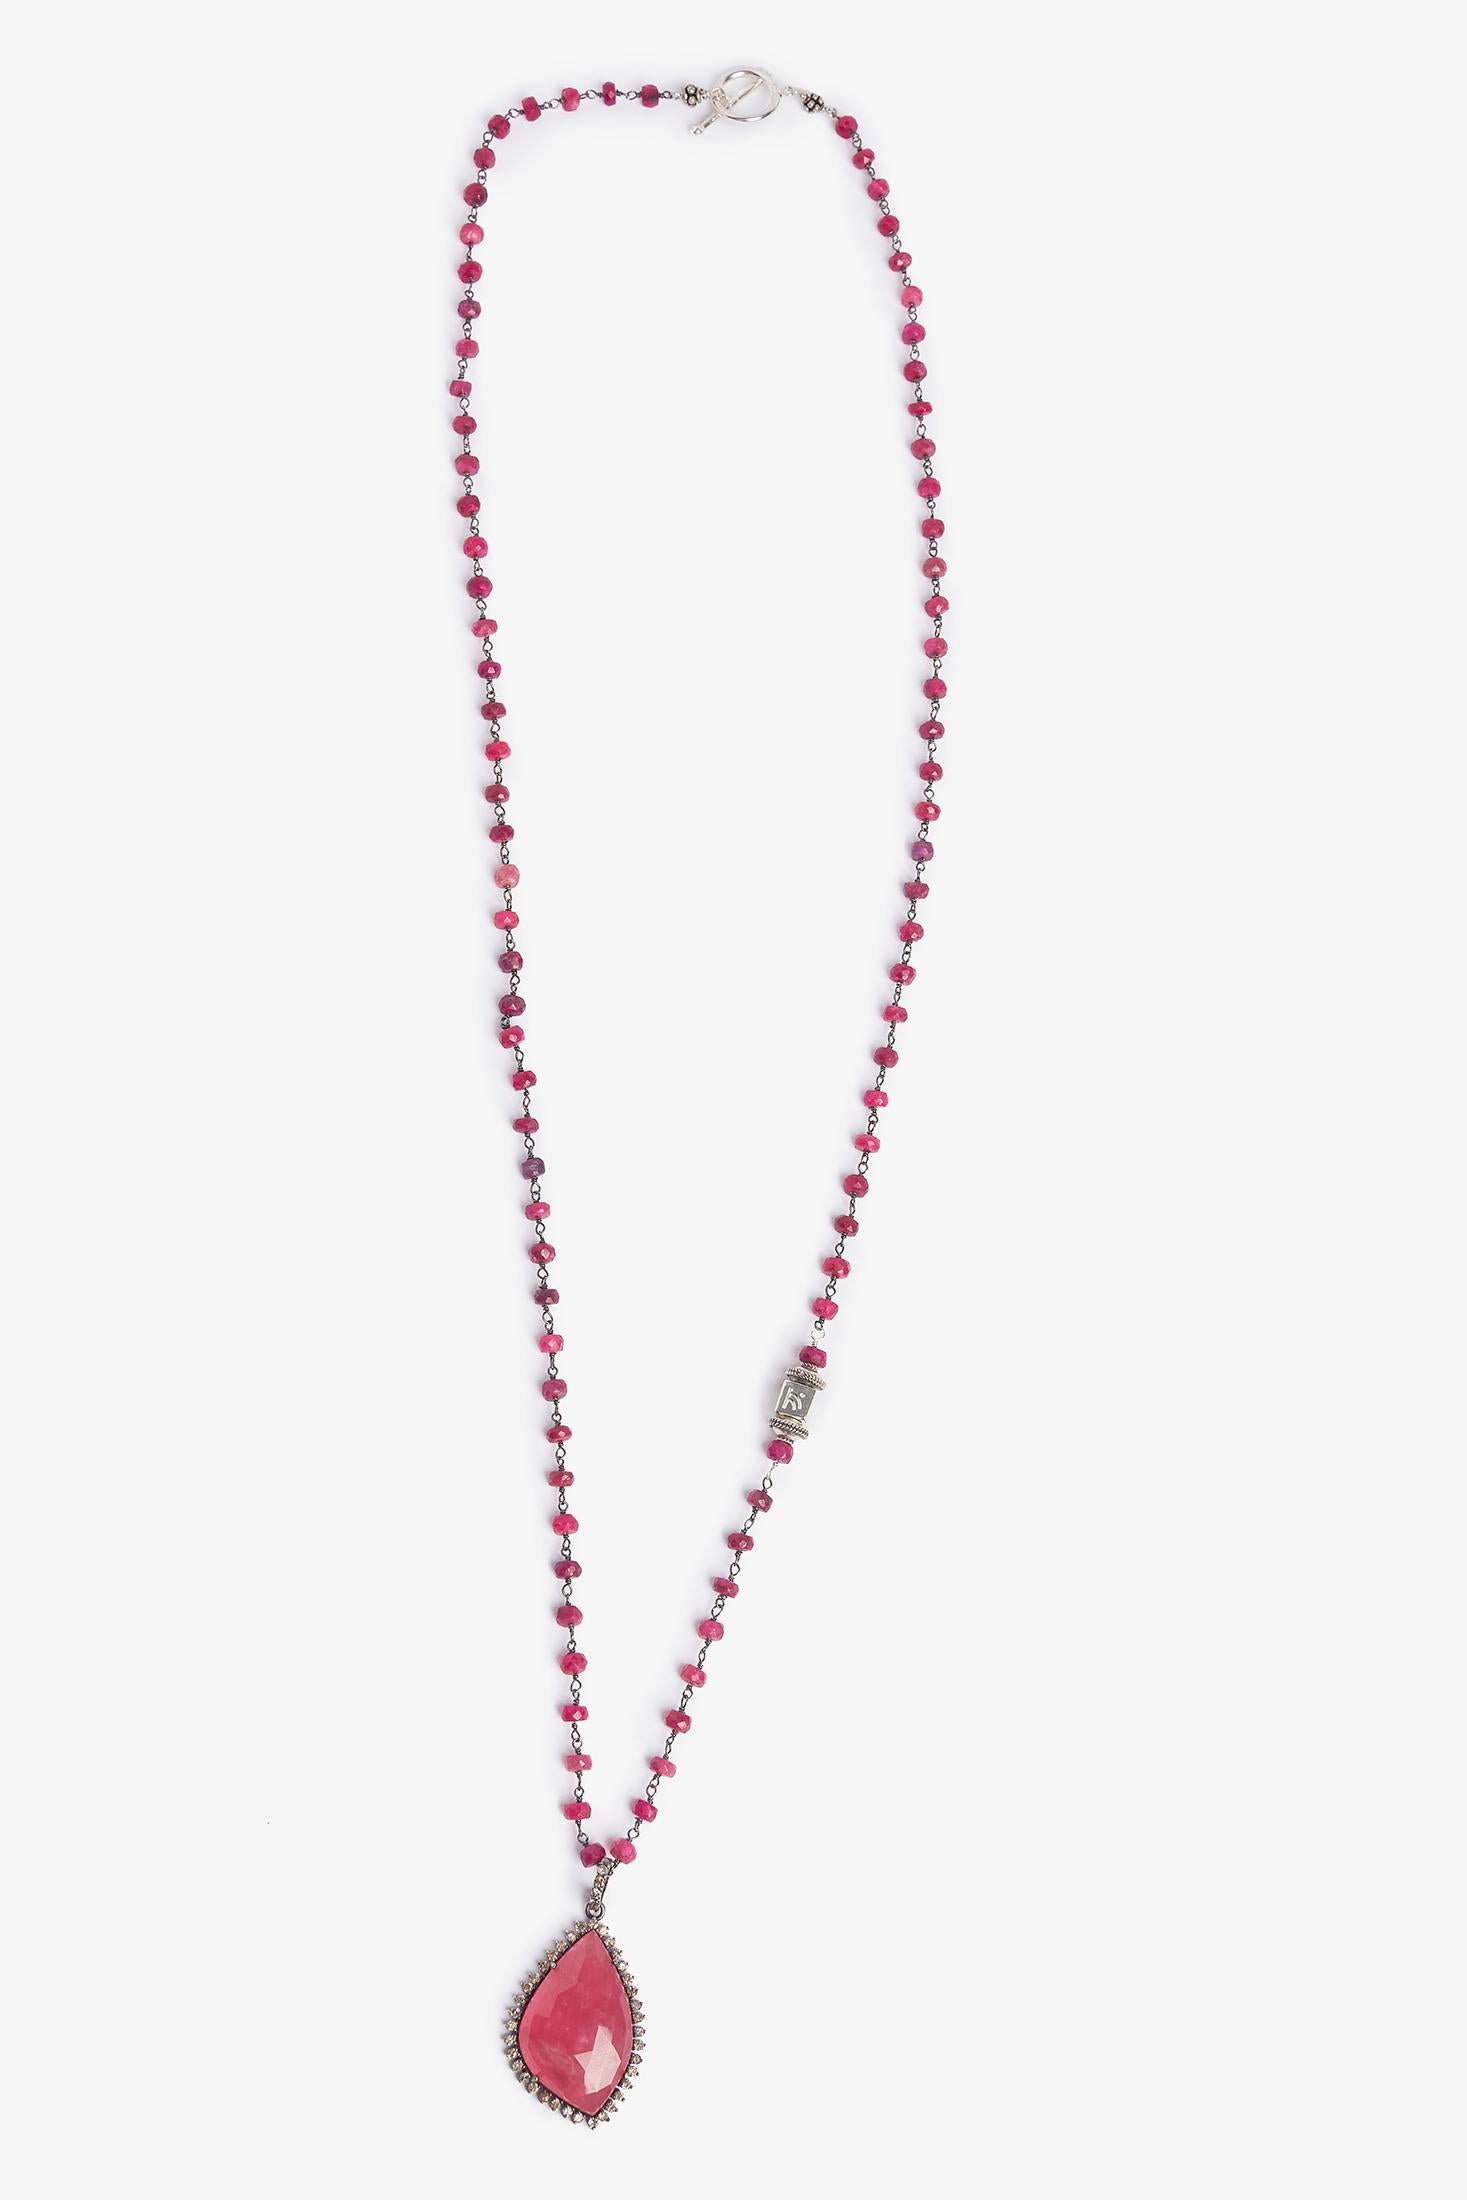 Artisan Red Ruby Asmara Necklace For Sale